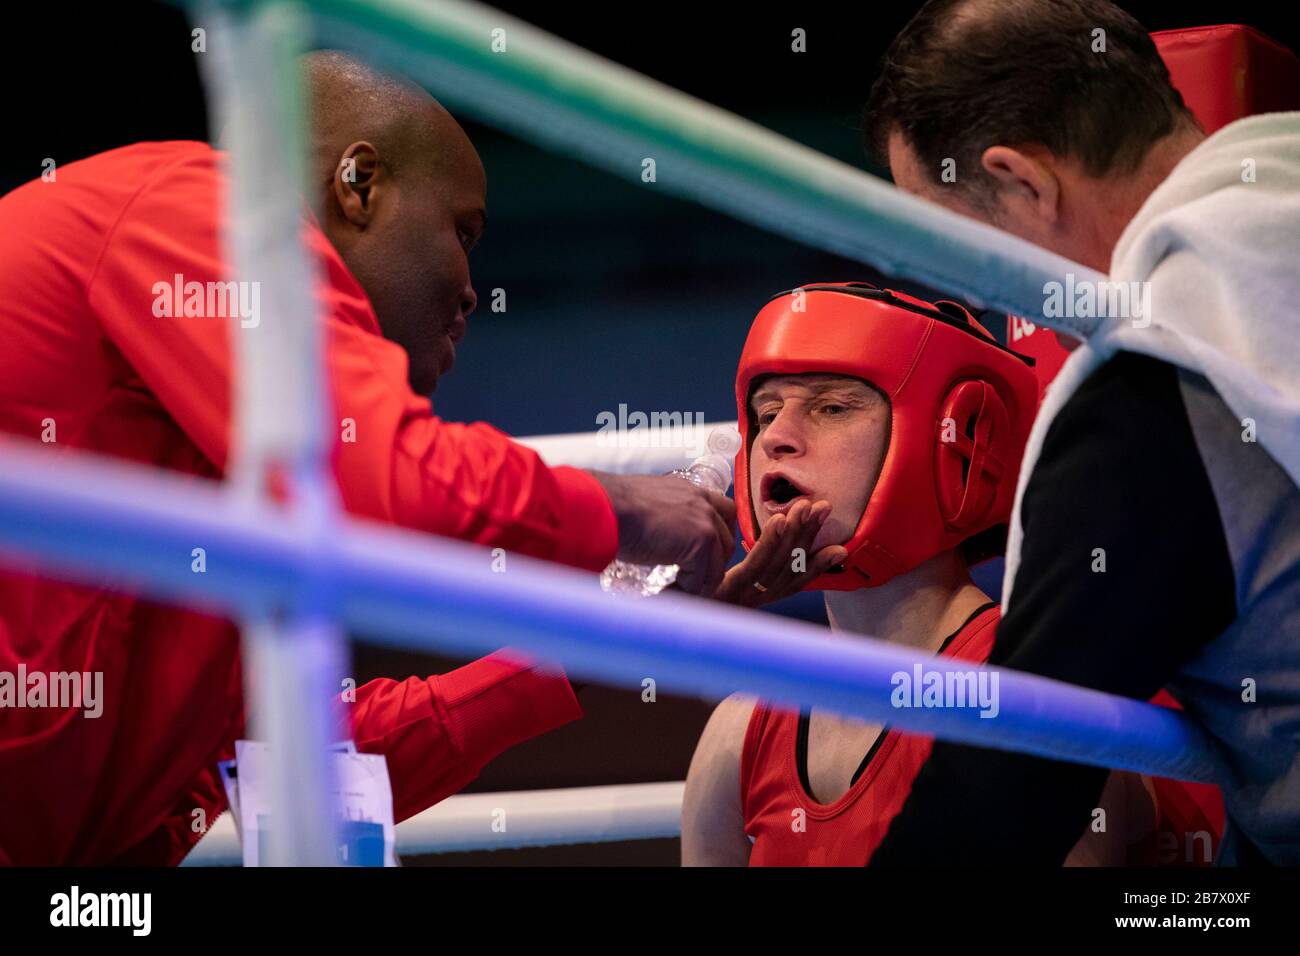 London, UK. 14-03-20. Delfine Persson (BEL) RED fights Nikoleta Pita (GRE) BLUE during the Road to Tokyo European Olympic Boxing Qualification Event. Stock Photo